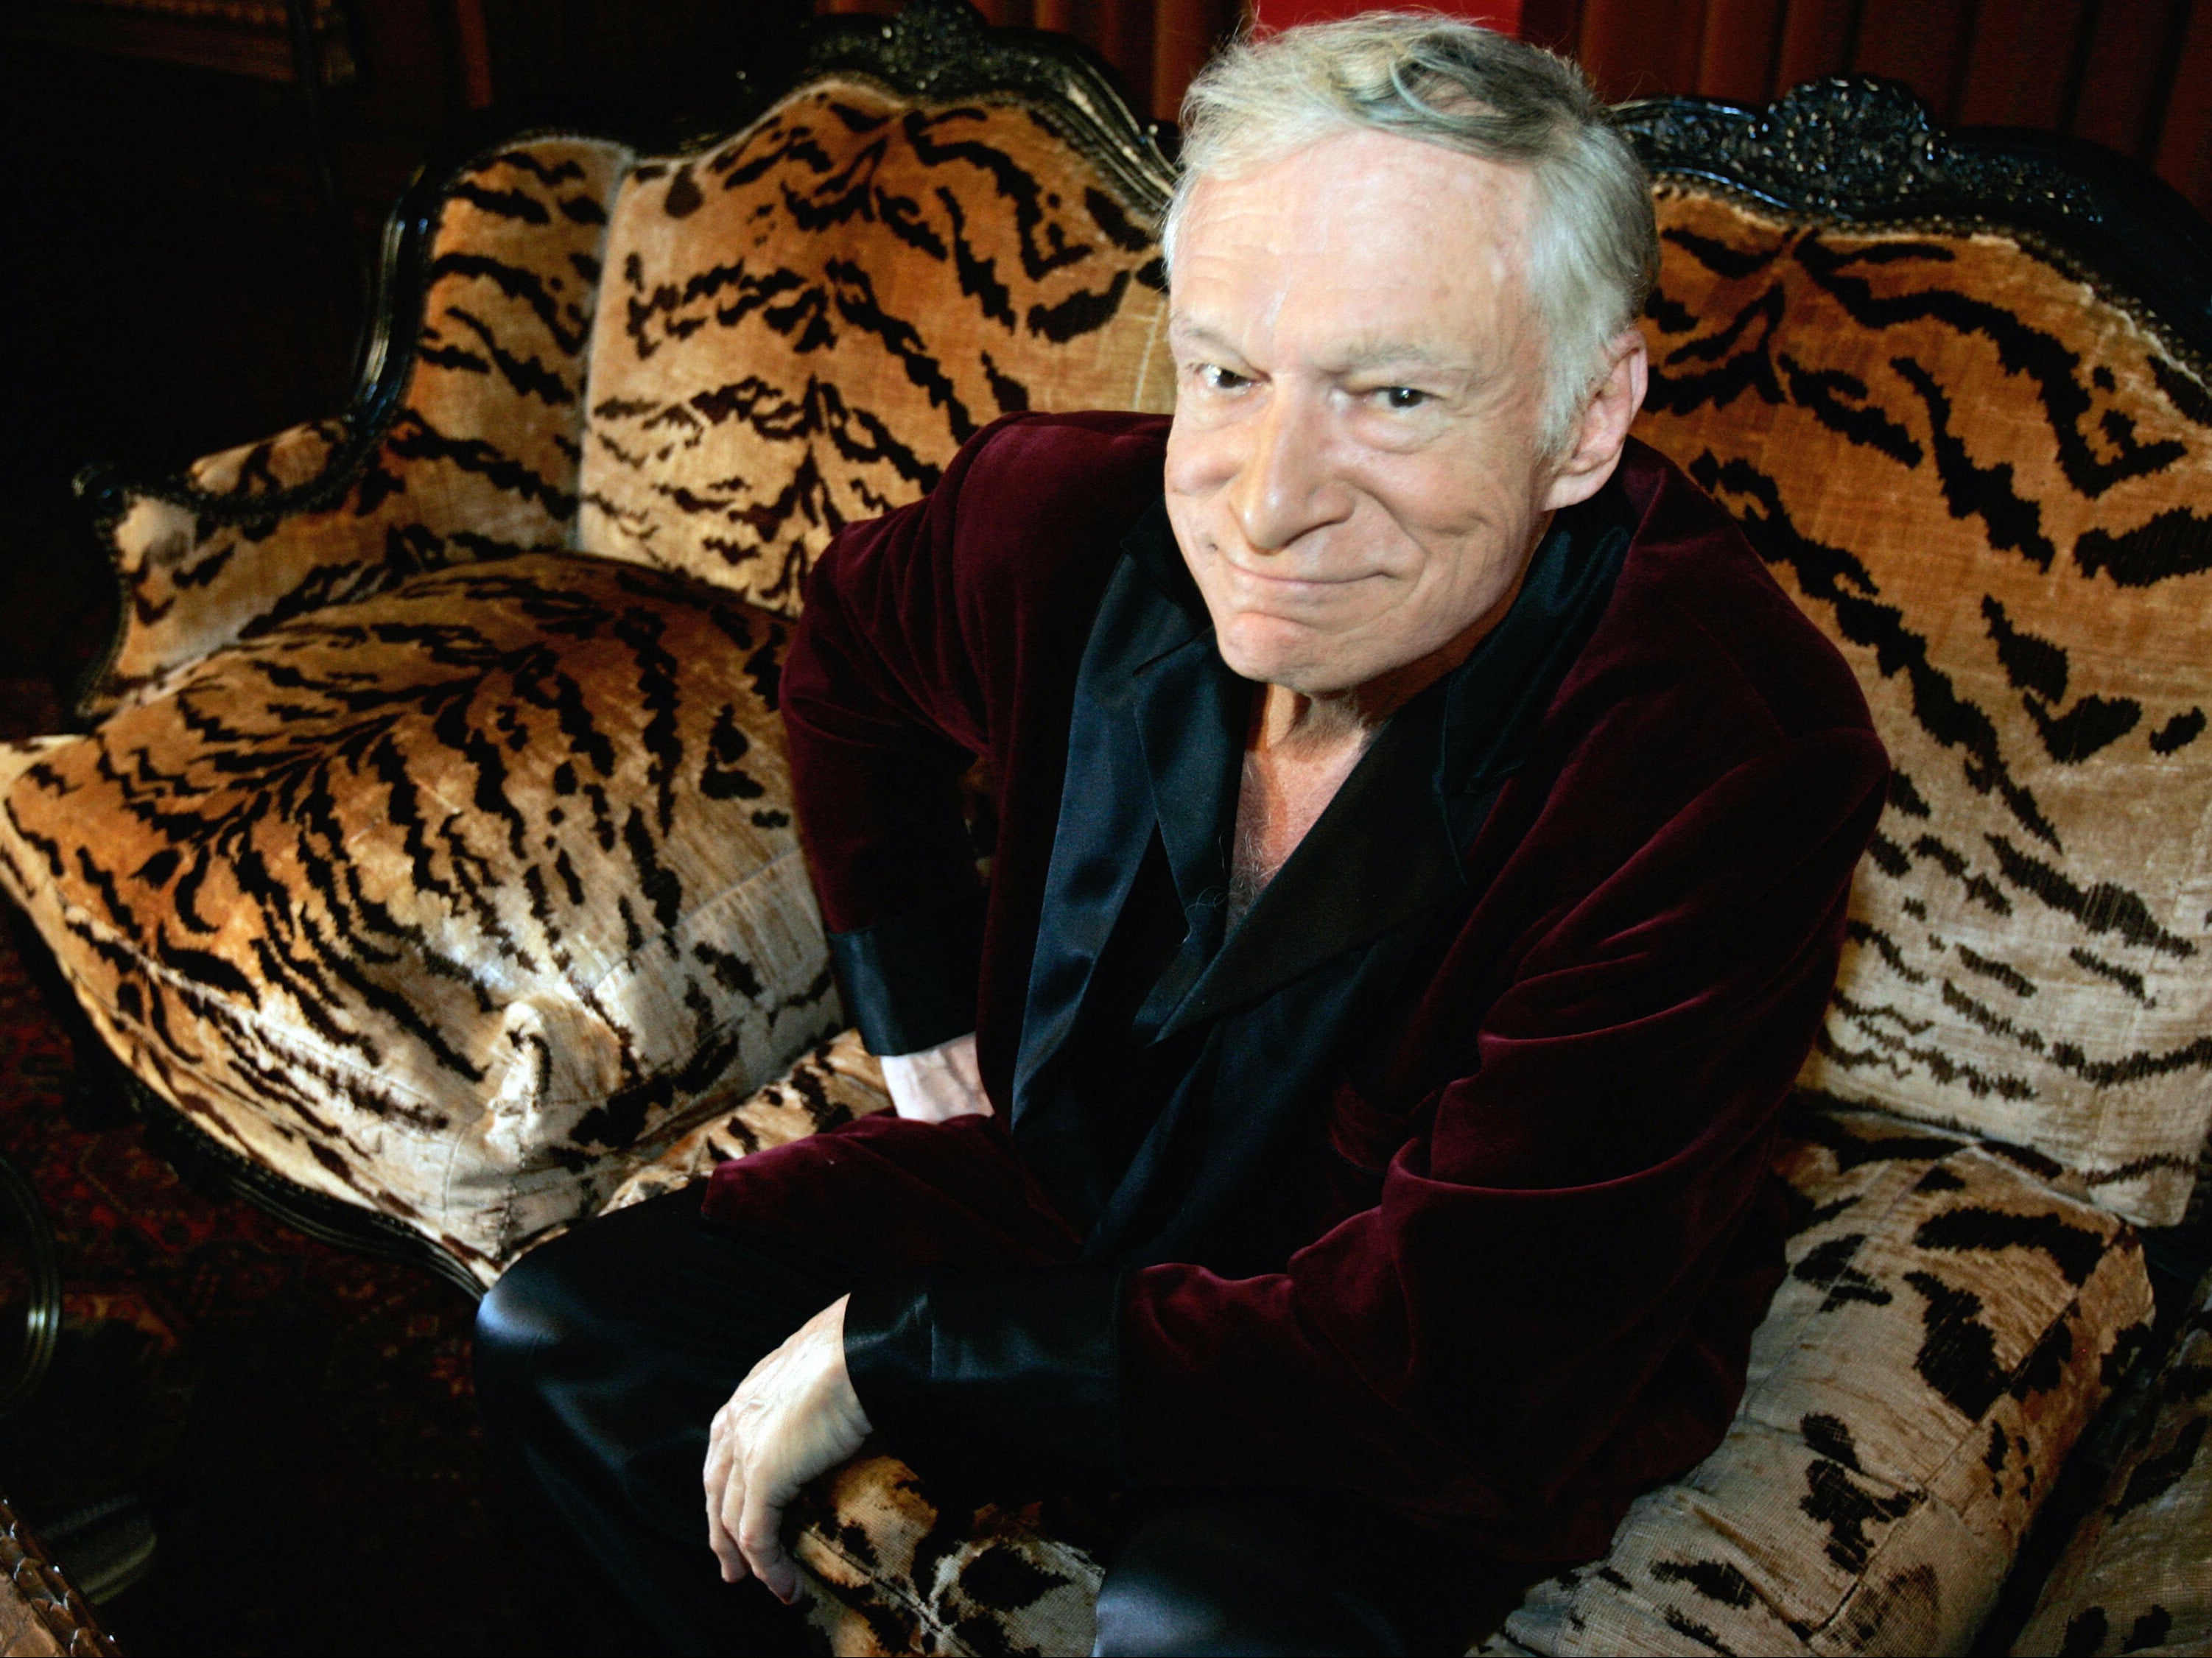 Hugh Hefner poses for a photo during an interview with journalists at his mansion in Los Angeles, California, on 23 August 2006